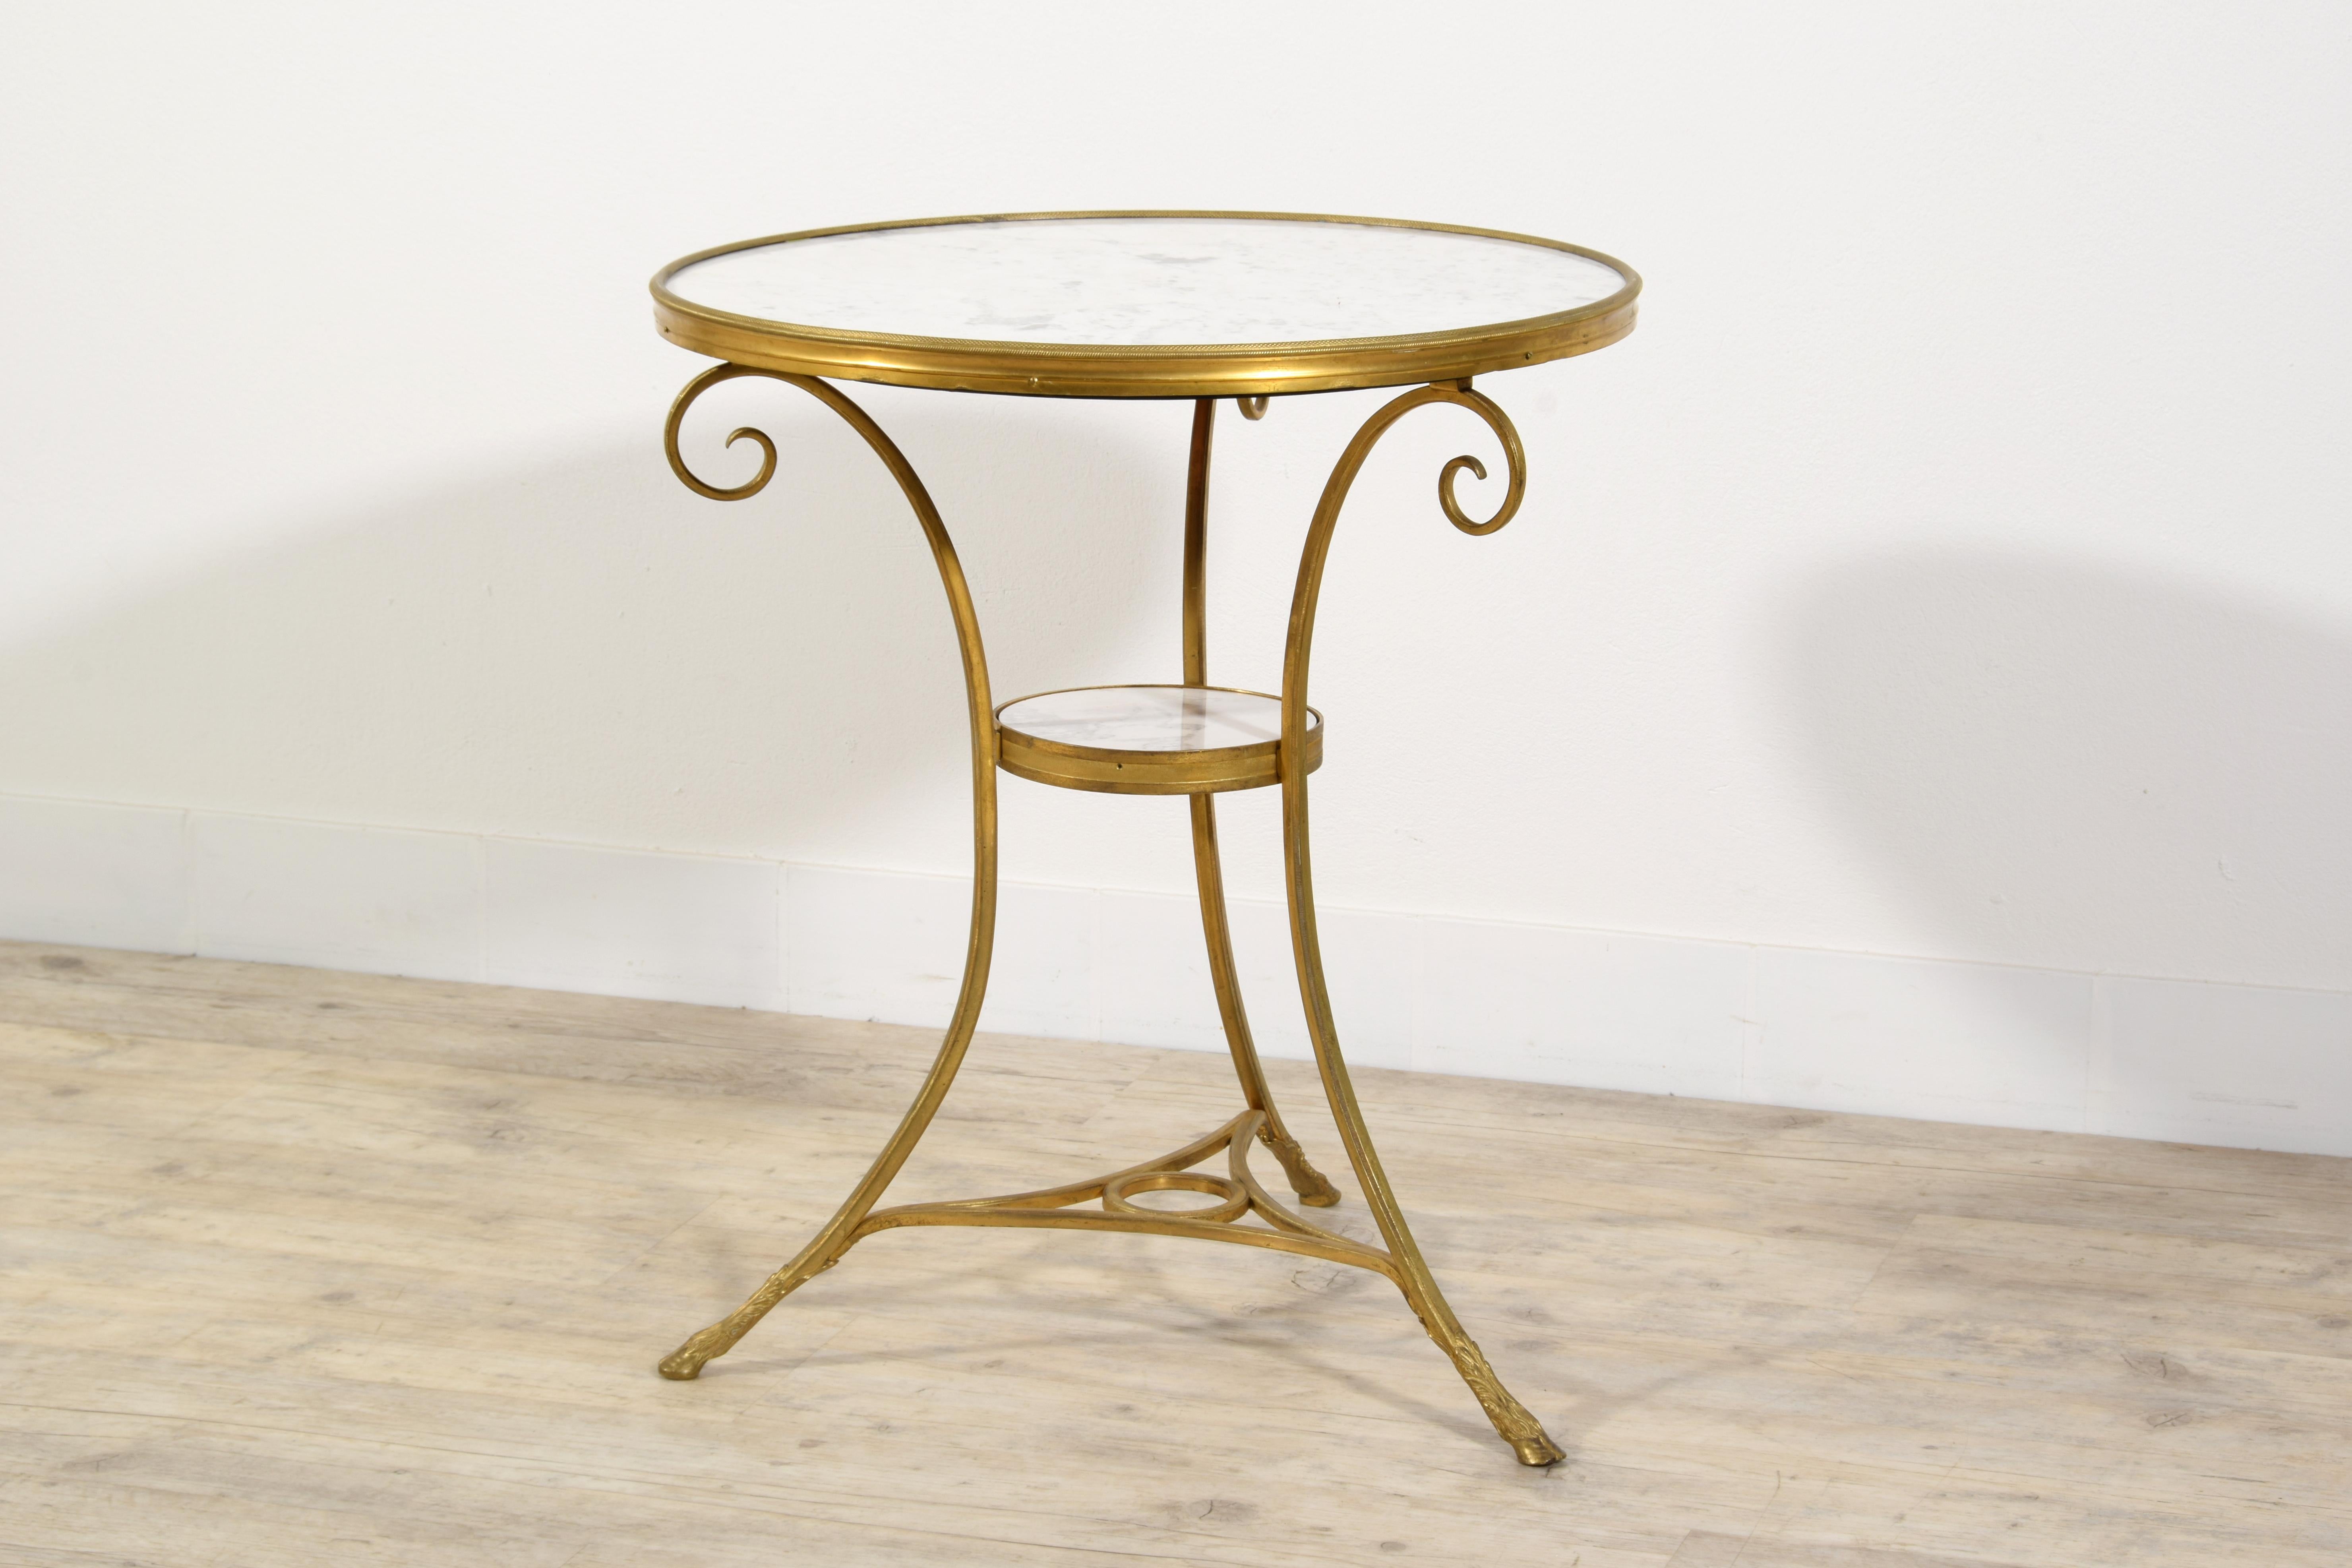 Louis XVI style French gilt bronze tripod coffee table or guéridon
France, late 19th century

The elegant coffee table or guéridon was made in France, towards the end of the 19th century, in the style of the Louis XVI period.
The double top white